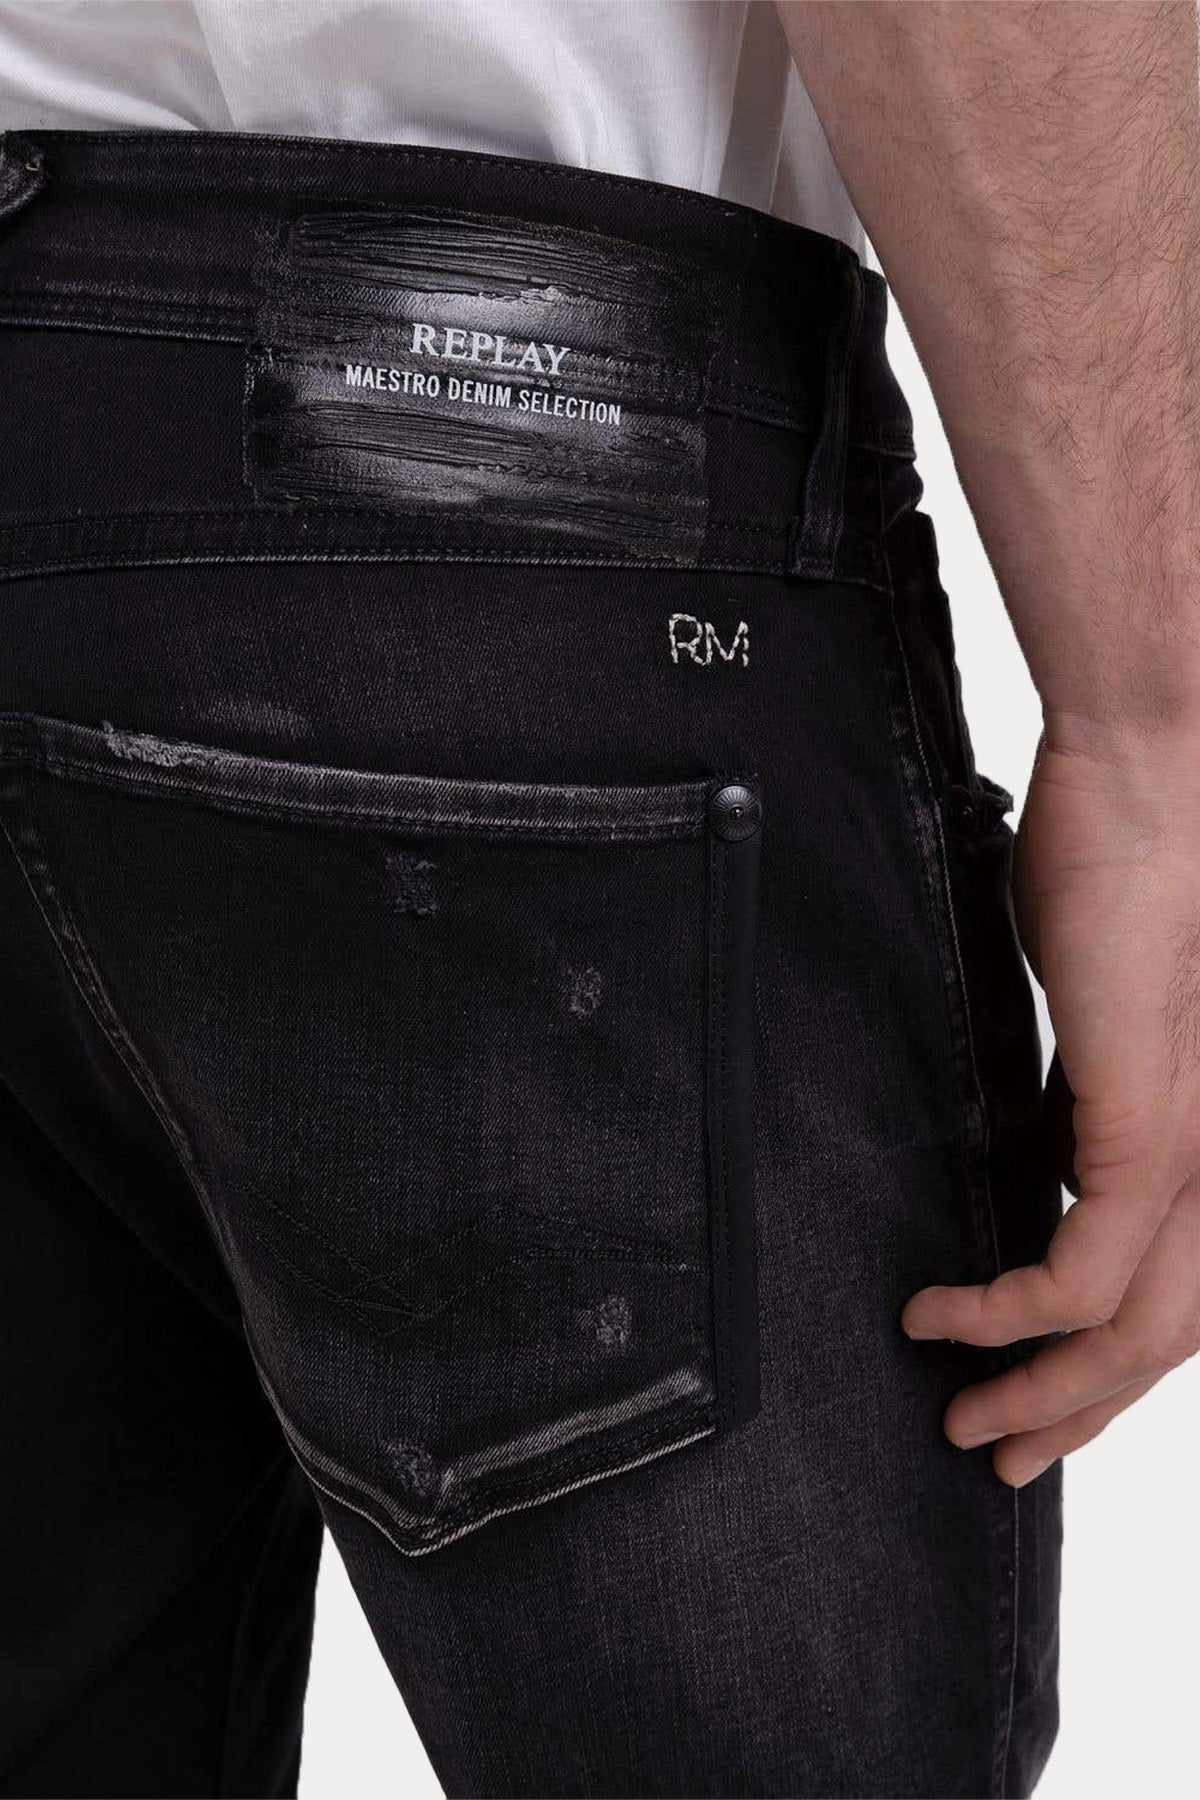 Replay Bronny Slim Fit Jeans-Libas Trendy Fashion Store